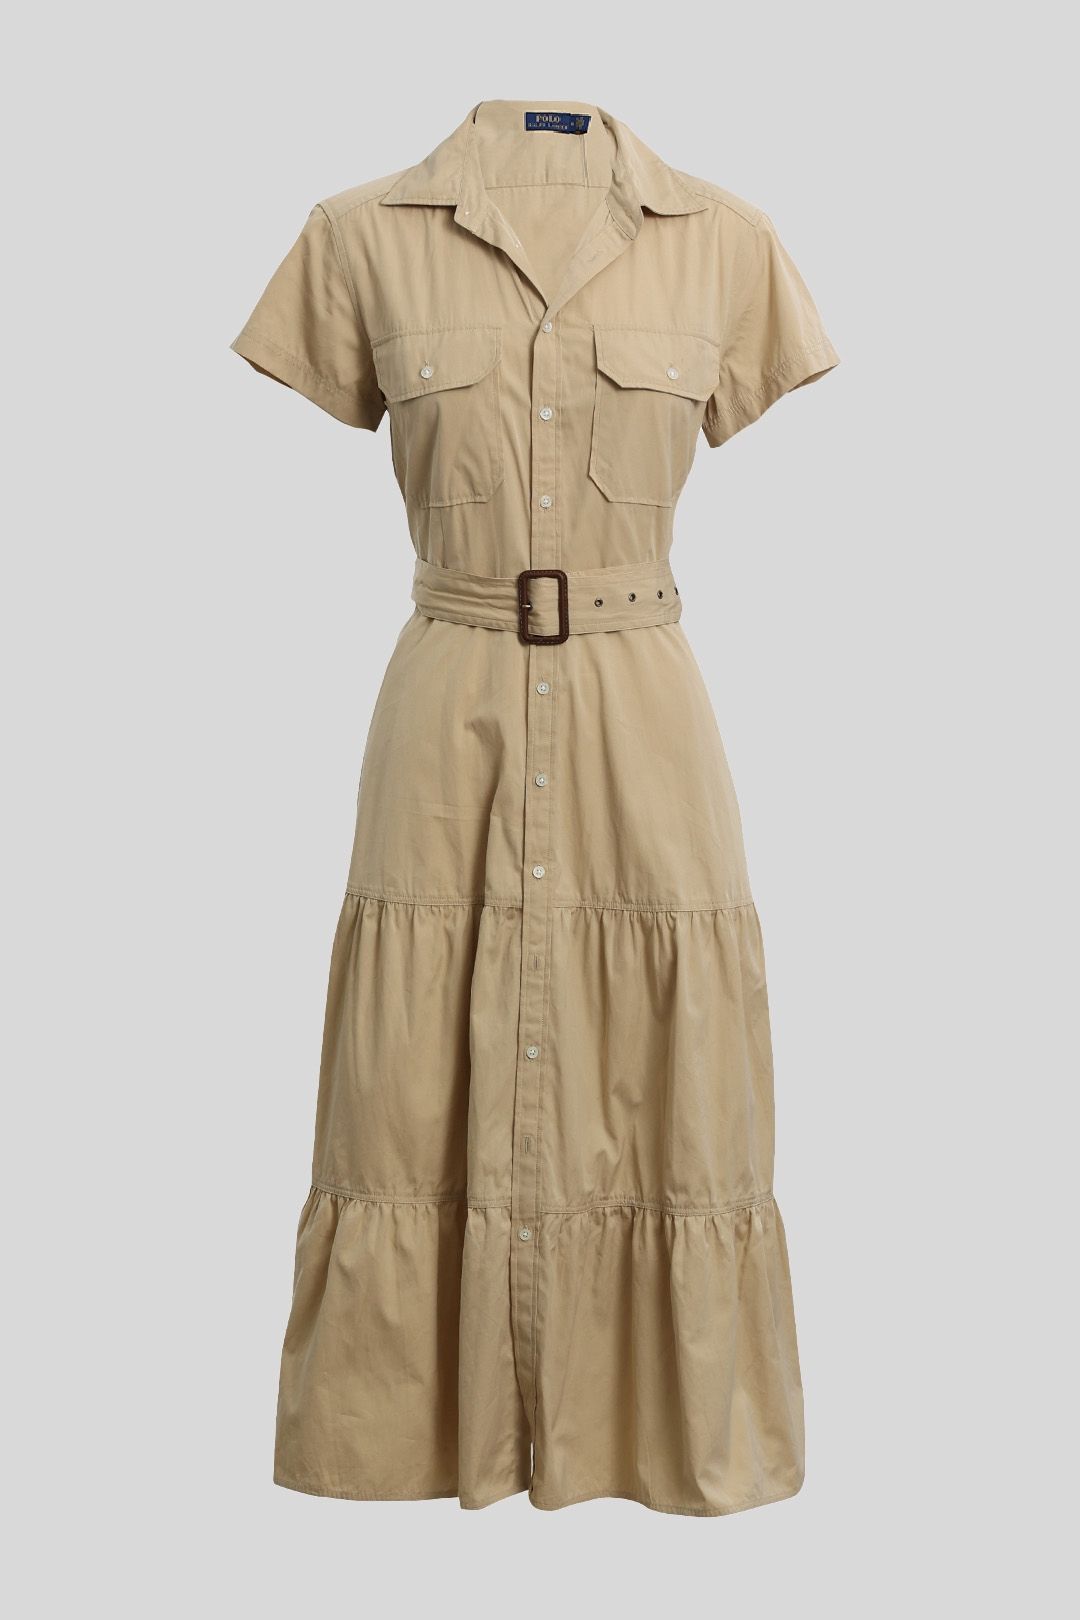 【Her lip to】Belted Cargo Shirt Dress